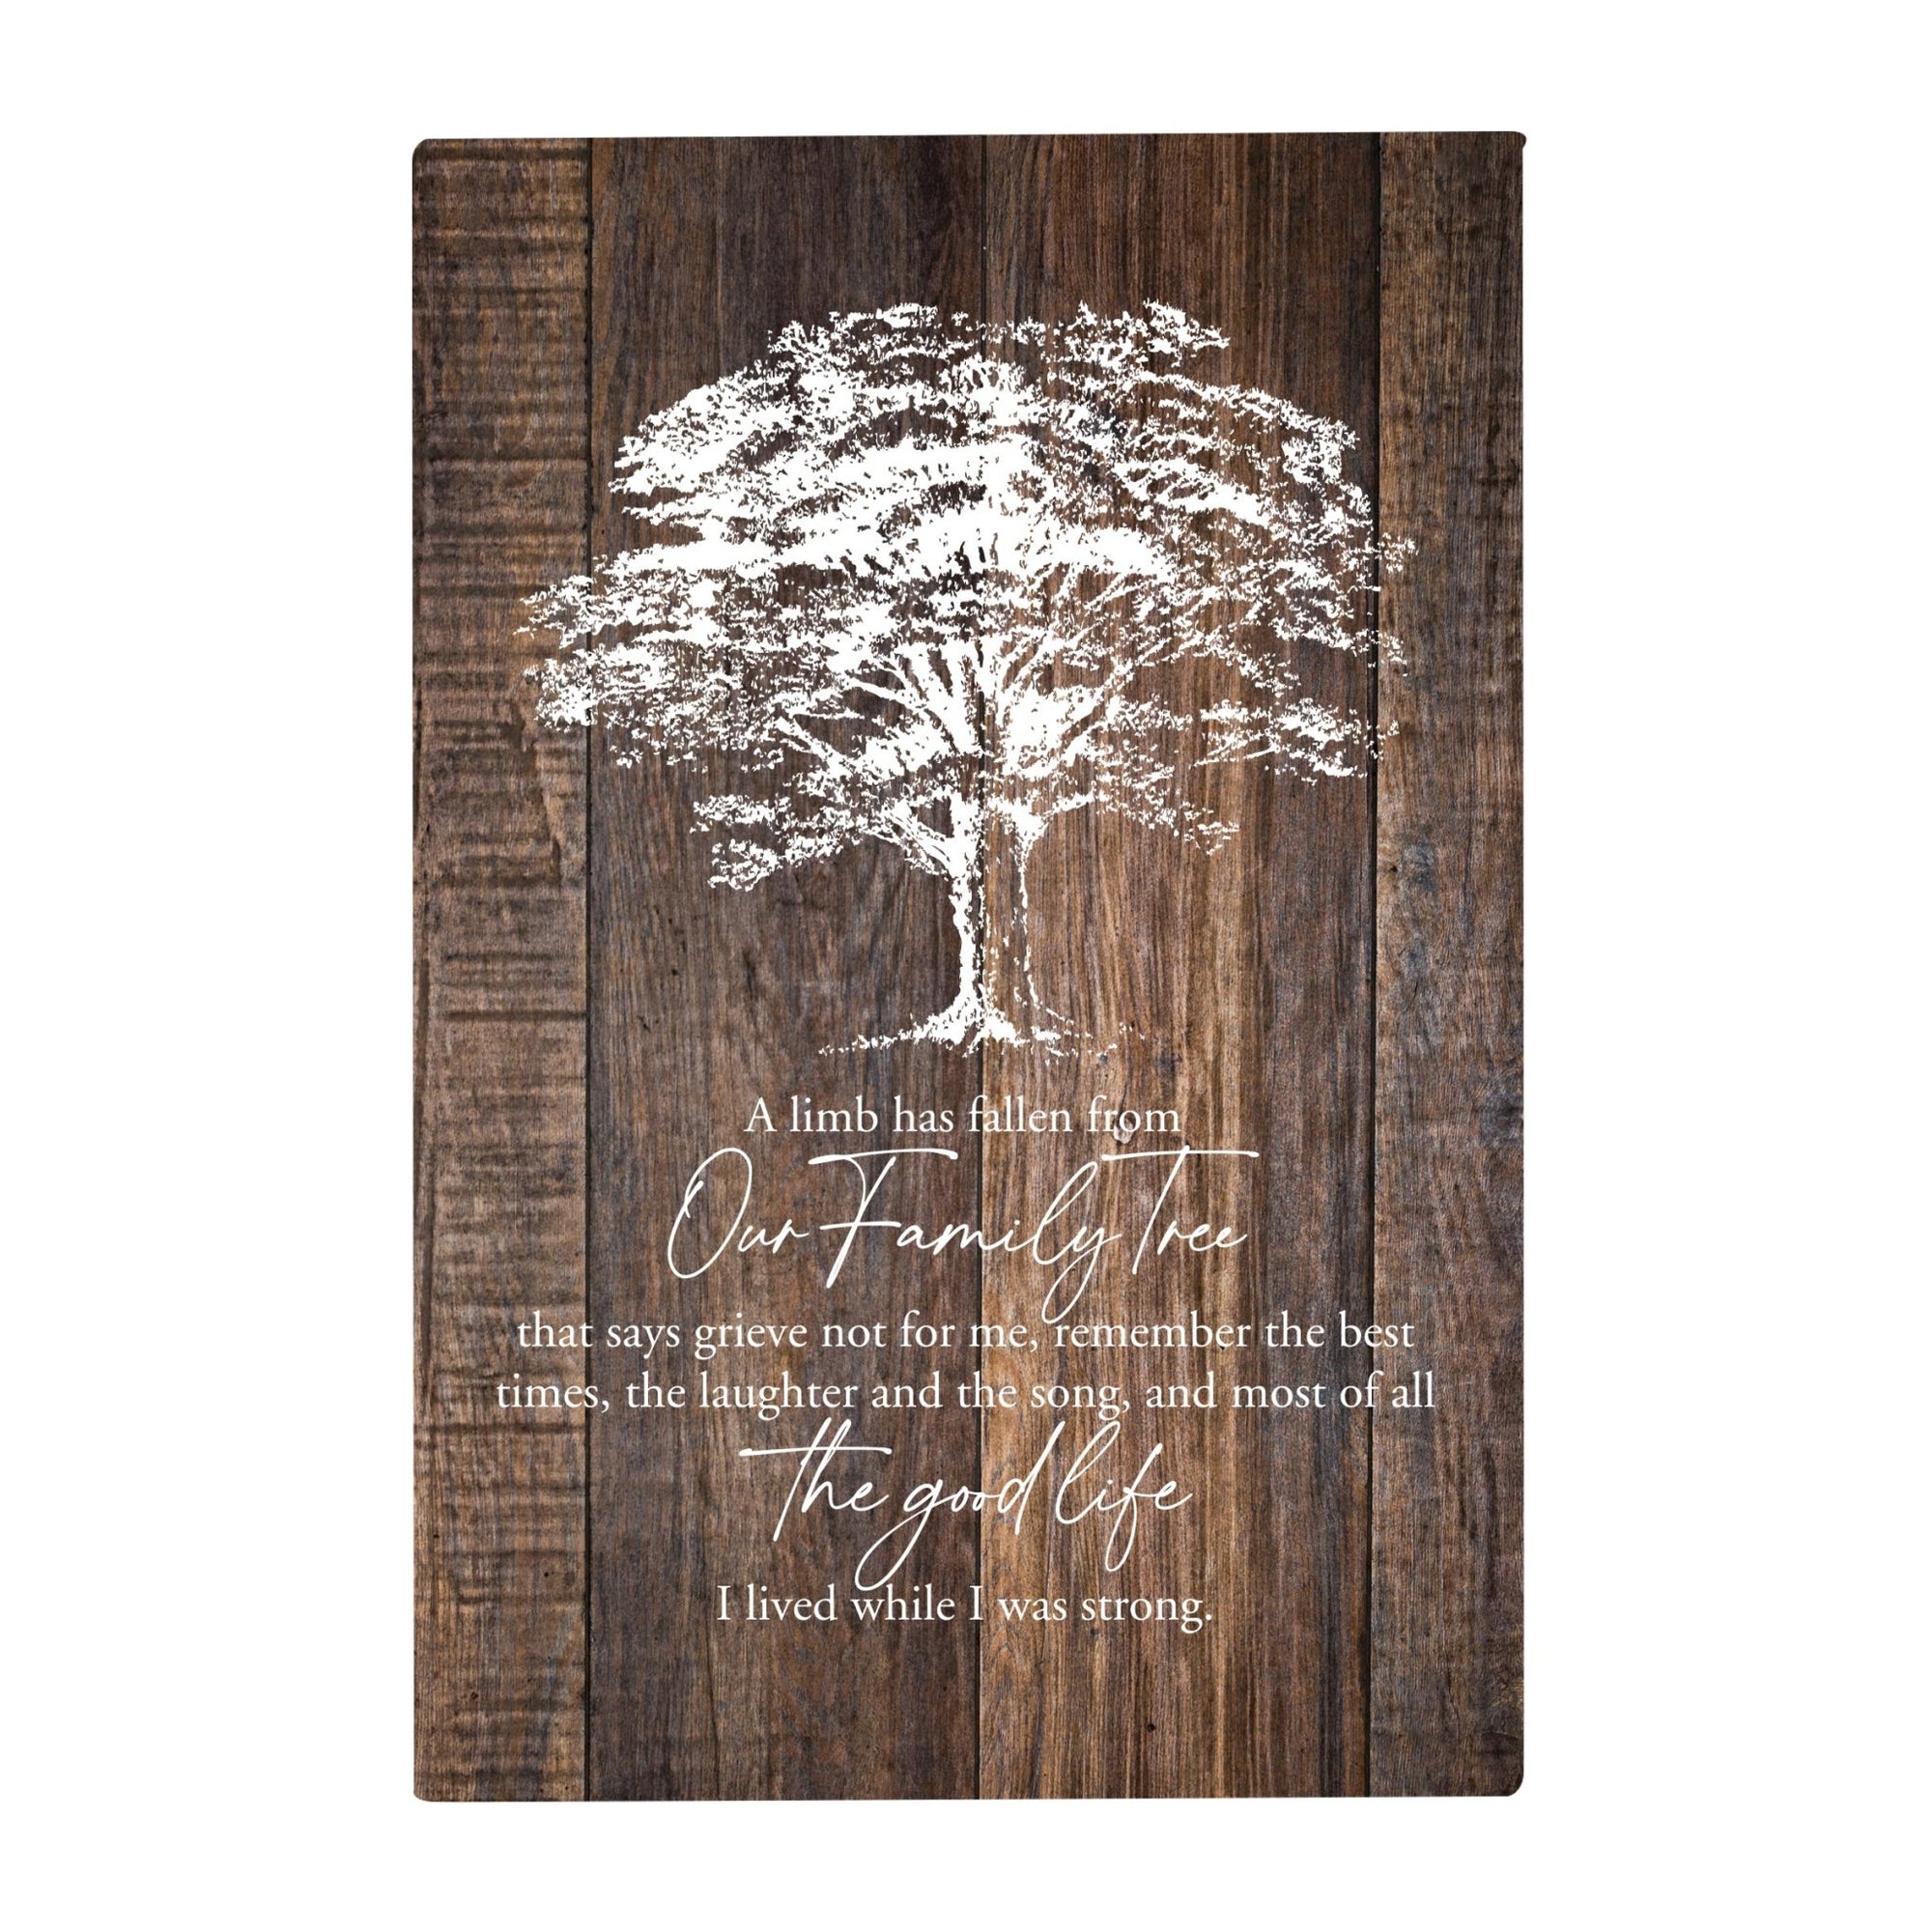 Inspirational Memorial 5.5x8 Wooden Tabletop Home Decorations - Our Family Tree - LifeSong Milestones